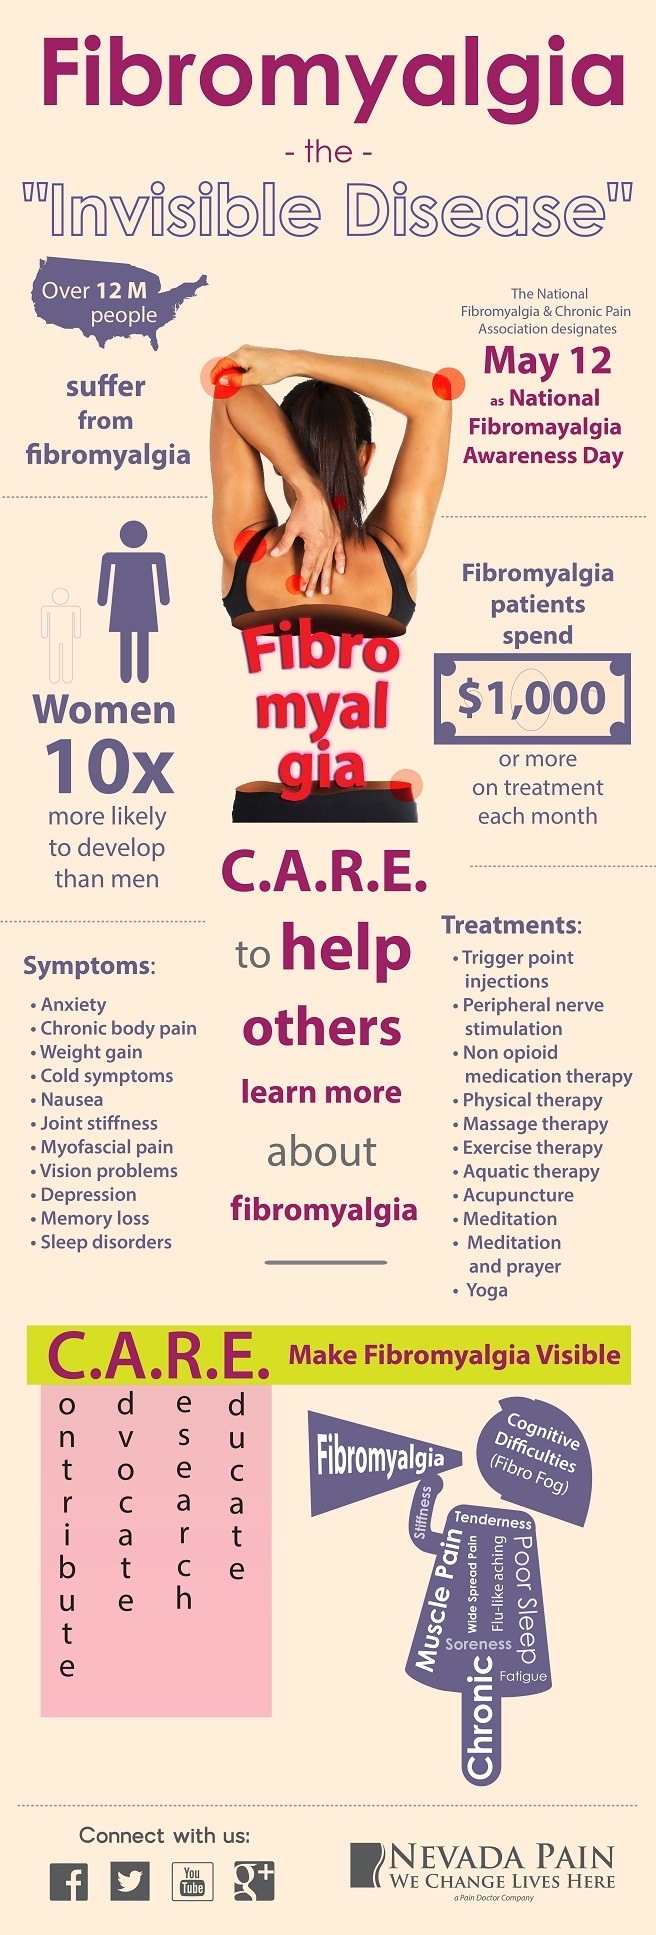 4 Facts Every Fibromyalgia Patient Wants You to Know